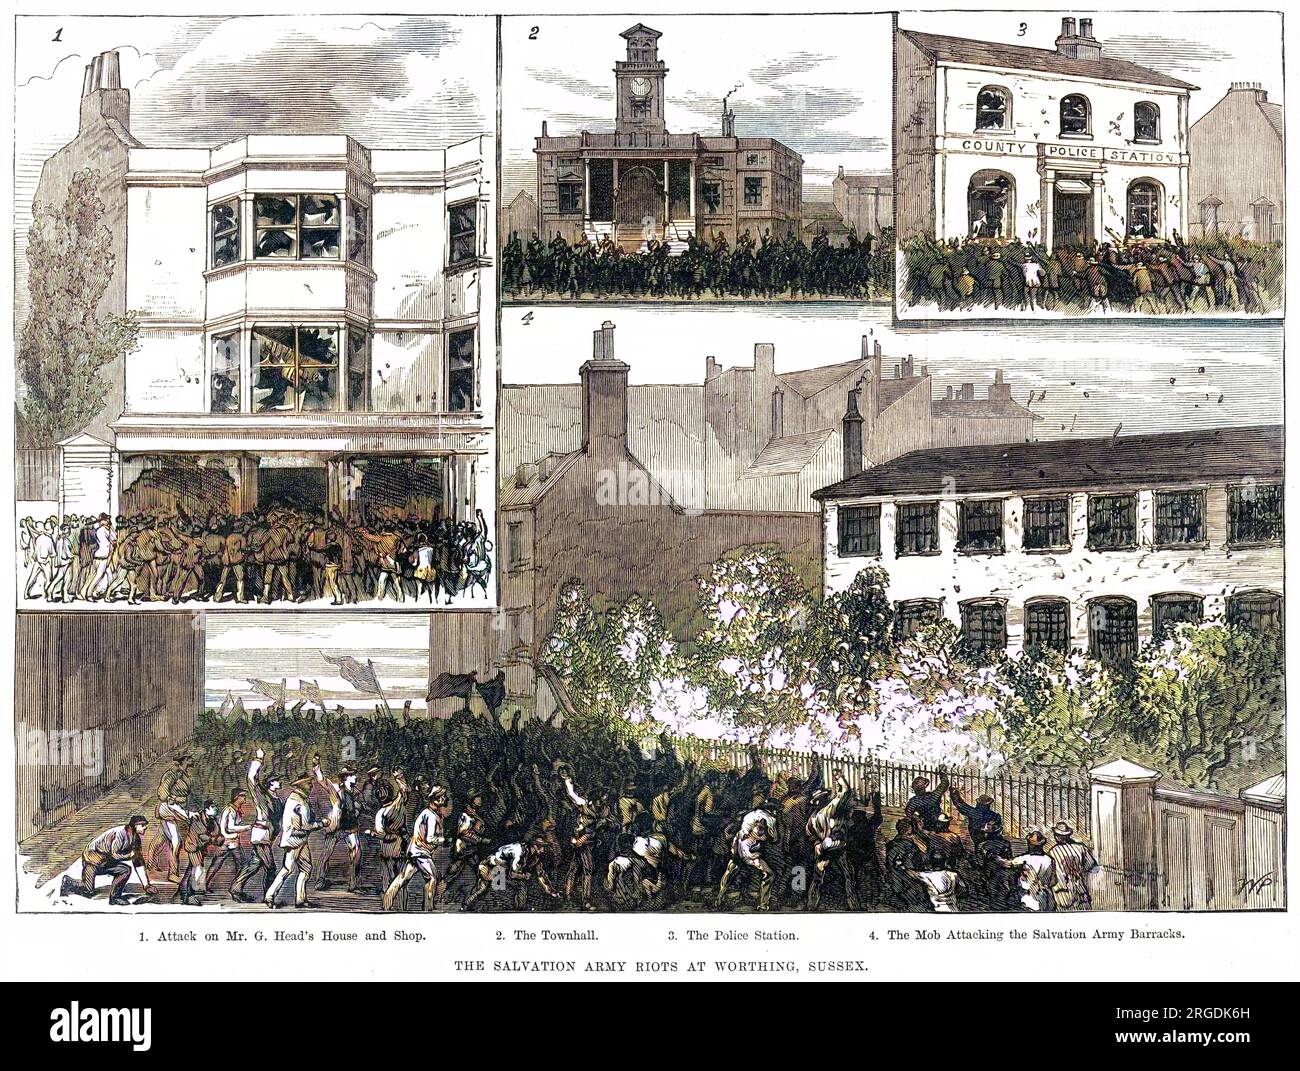 These images show the 'Skeleton Army', opponents of the Salvation Army organised by 'those interested in Sunday drinking', rioting against one of the Salvation Army's religious Sunday processions. The members of the Salvation Army escaped into Montague Hall and hid there for the rest of the day.  1. Attack on Mr. G. Head's house and shop. 2. The Townhall 3. The Police Station 4. The mob attacking the Salvation Army Barracks. Stock Photo